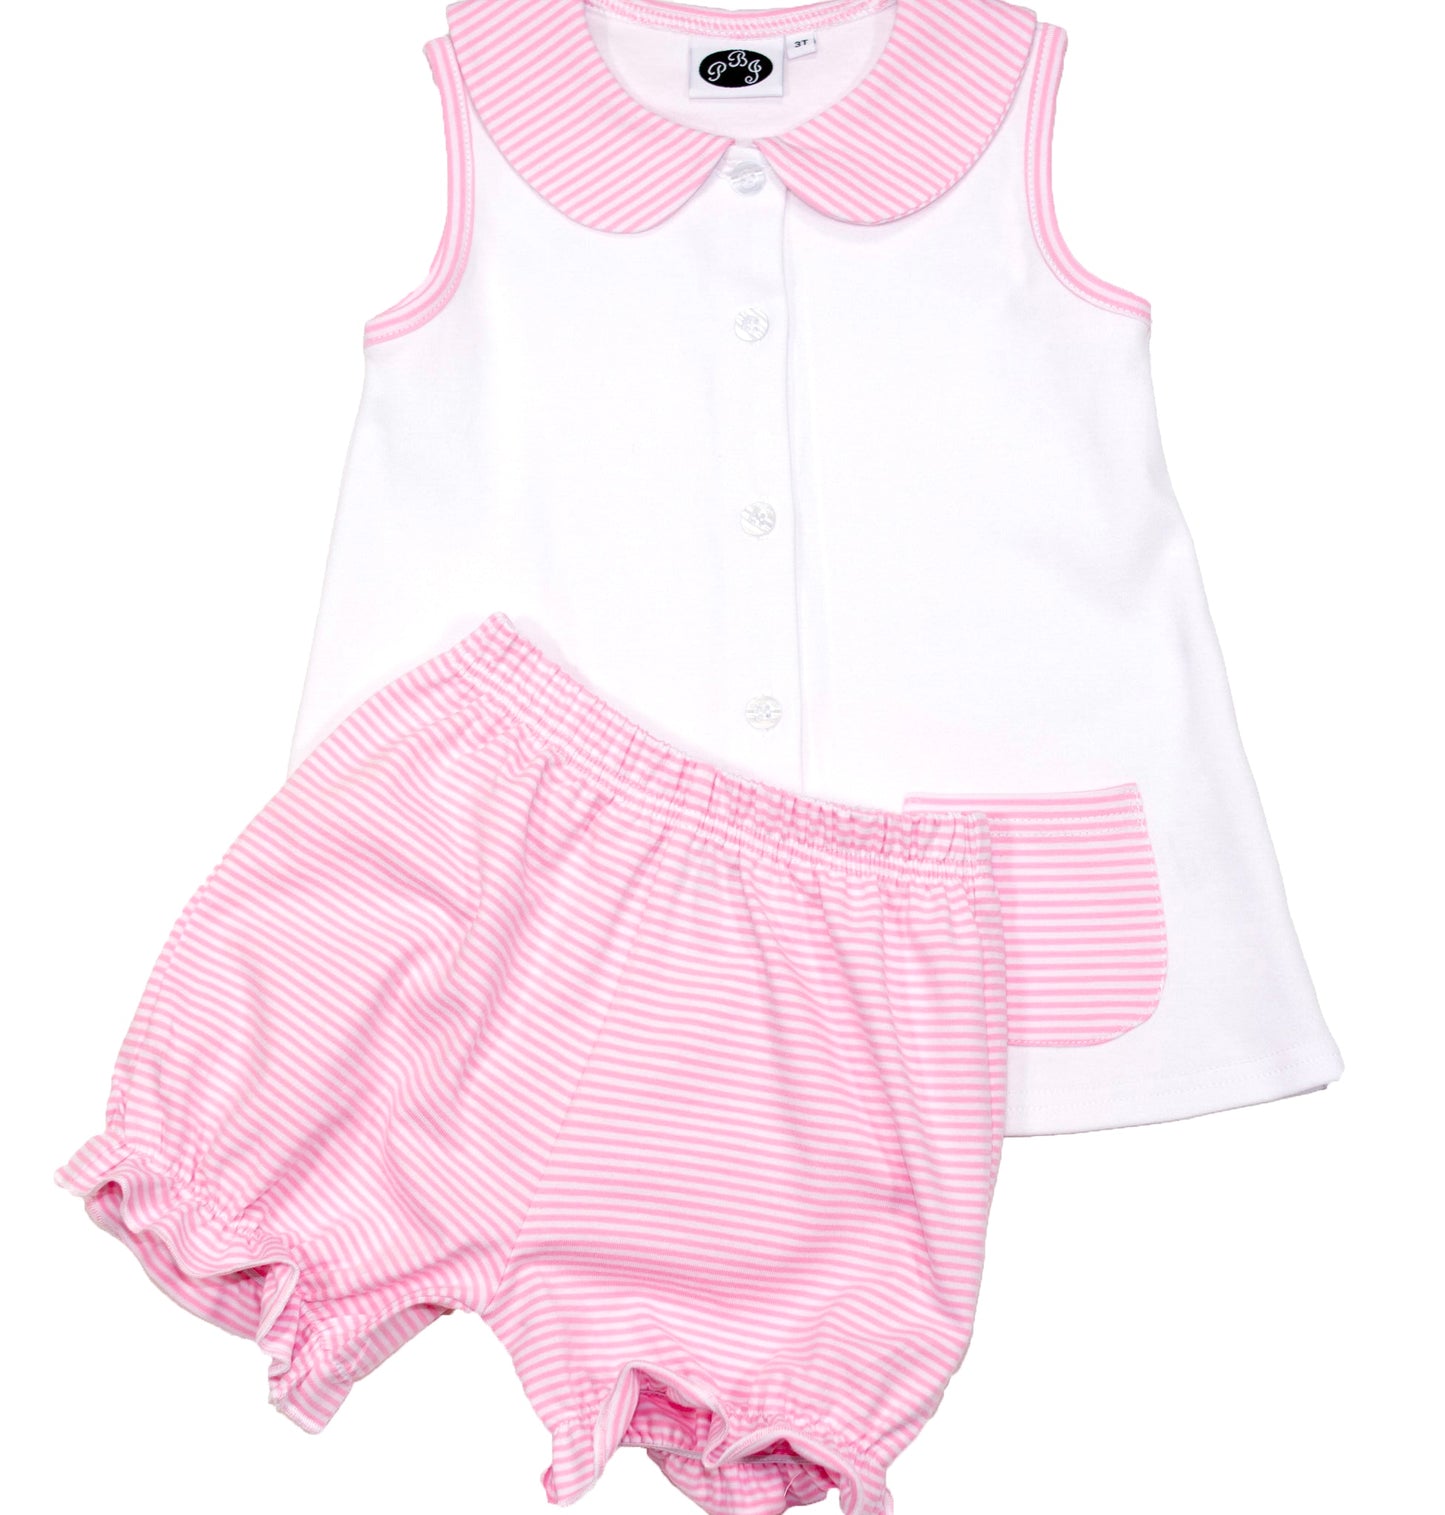 Alex top solid white with pink stripes